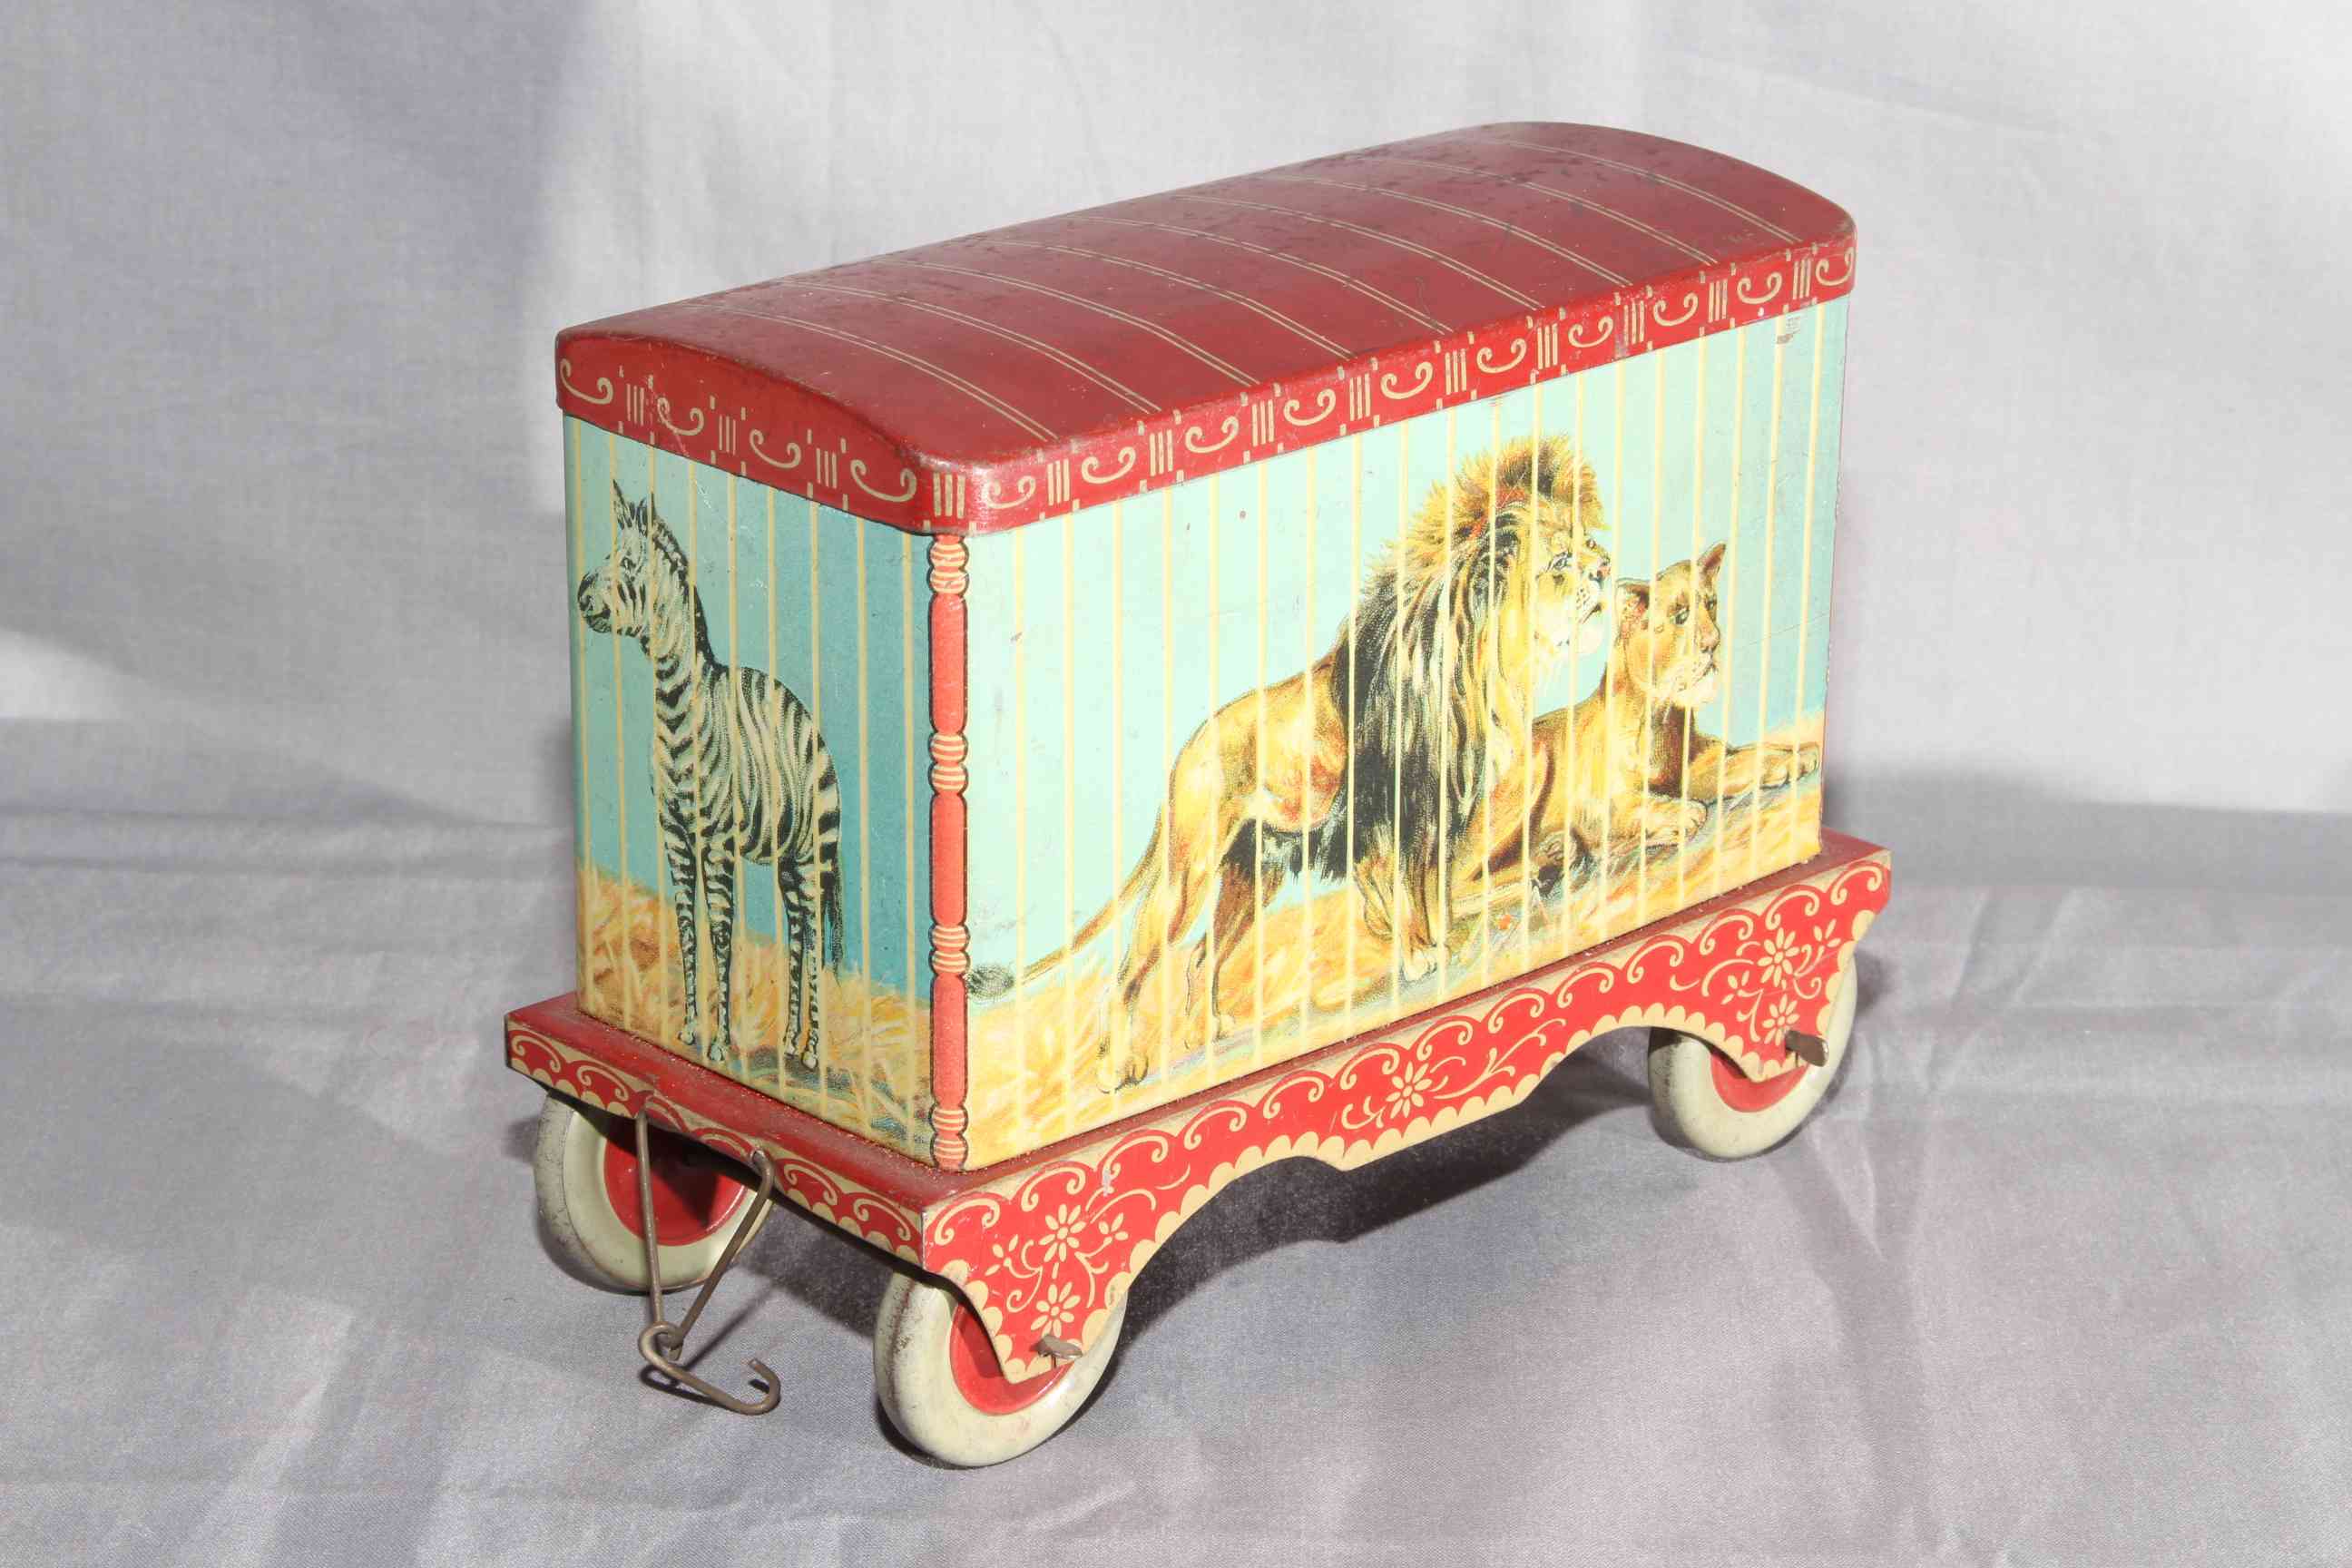 Crawfords Biscuit Tin in shape of Circus Animal Cage Trailer. Excellent. - Image 2 of 2